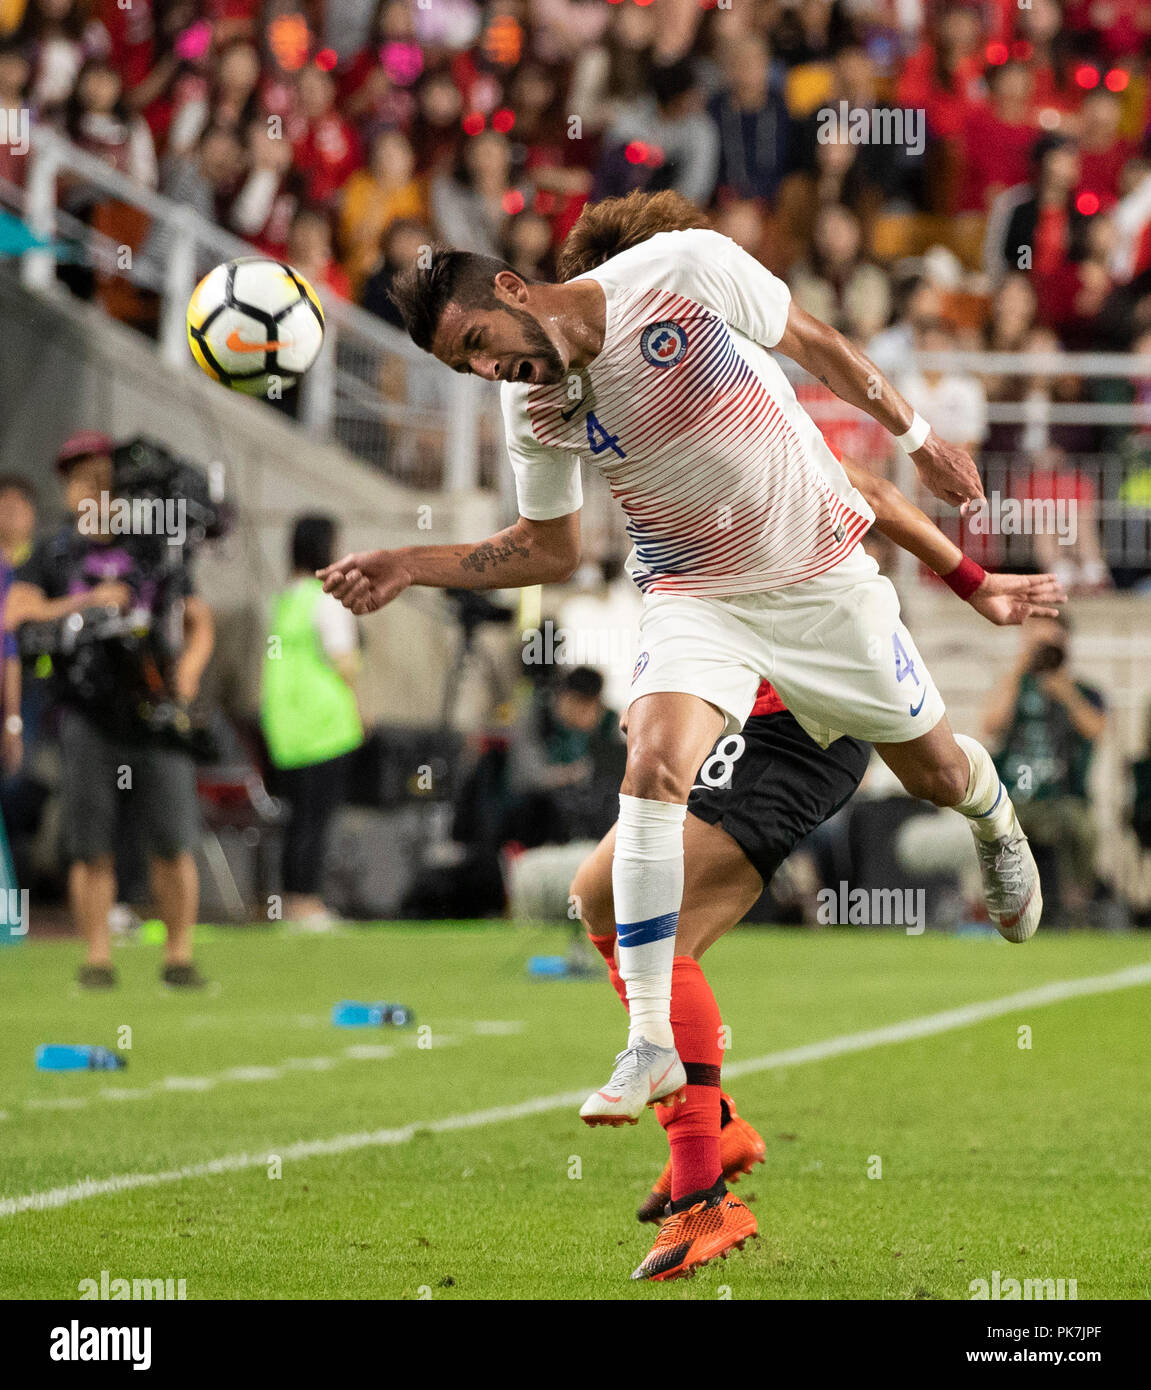 Suwon, South Korea. 11th Sep, 2018. Mauricio Isla (Front) of Chile heads for the ball during a friendly soccer match between South Korea and Chile at Suwon World Cup Stadium in Suwon, South Korea, on Sept. 11, 2018. The match ended with a 0-0 draw. Credit: Lee Sang-ho/Xinhua/Alamy Live News Stock Photo